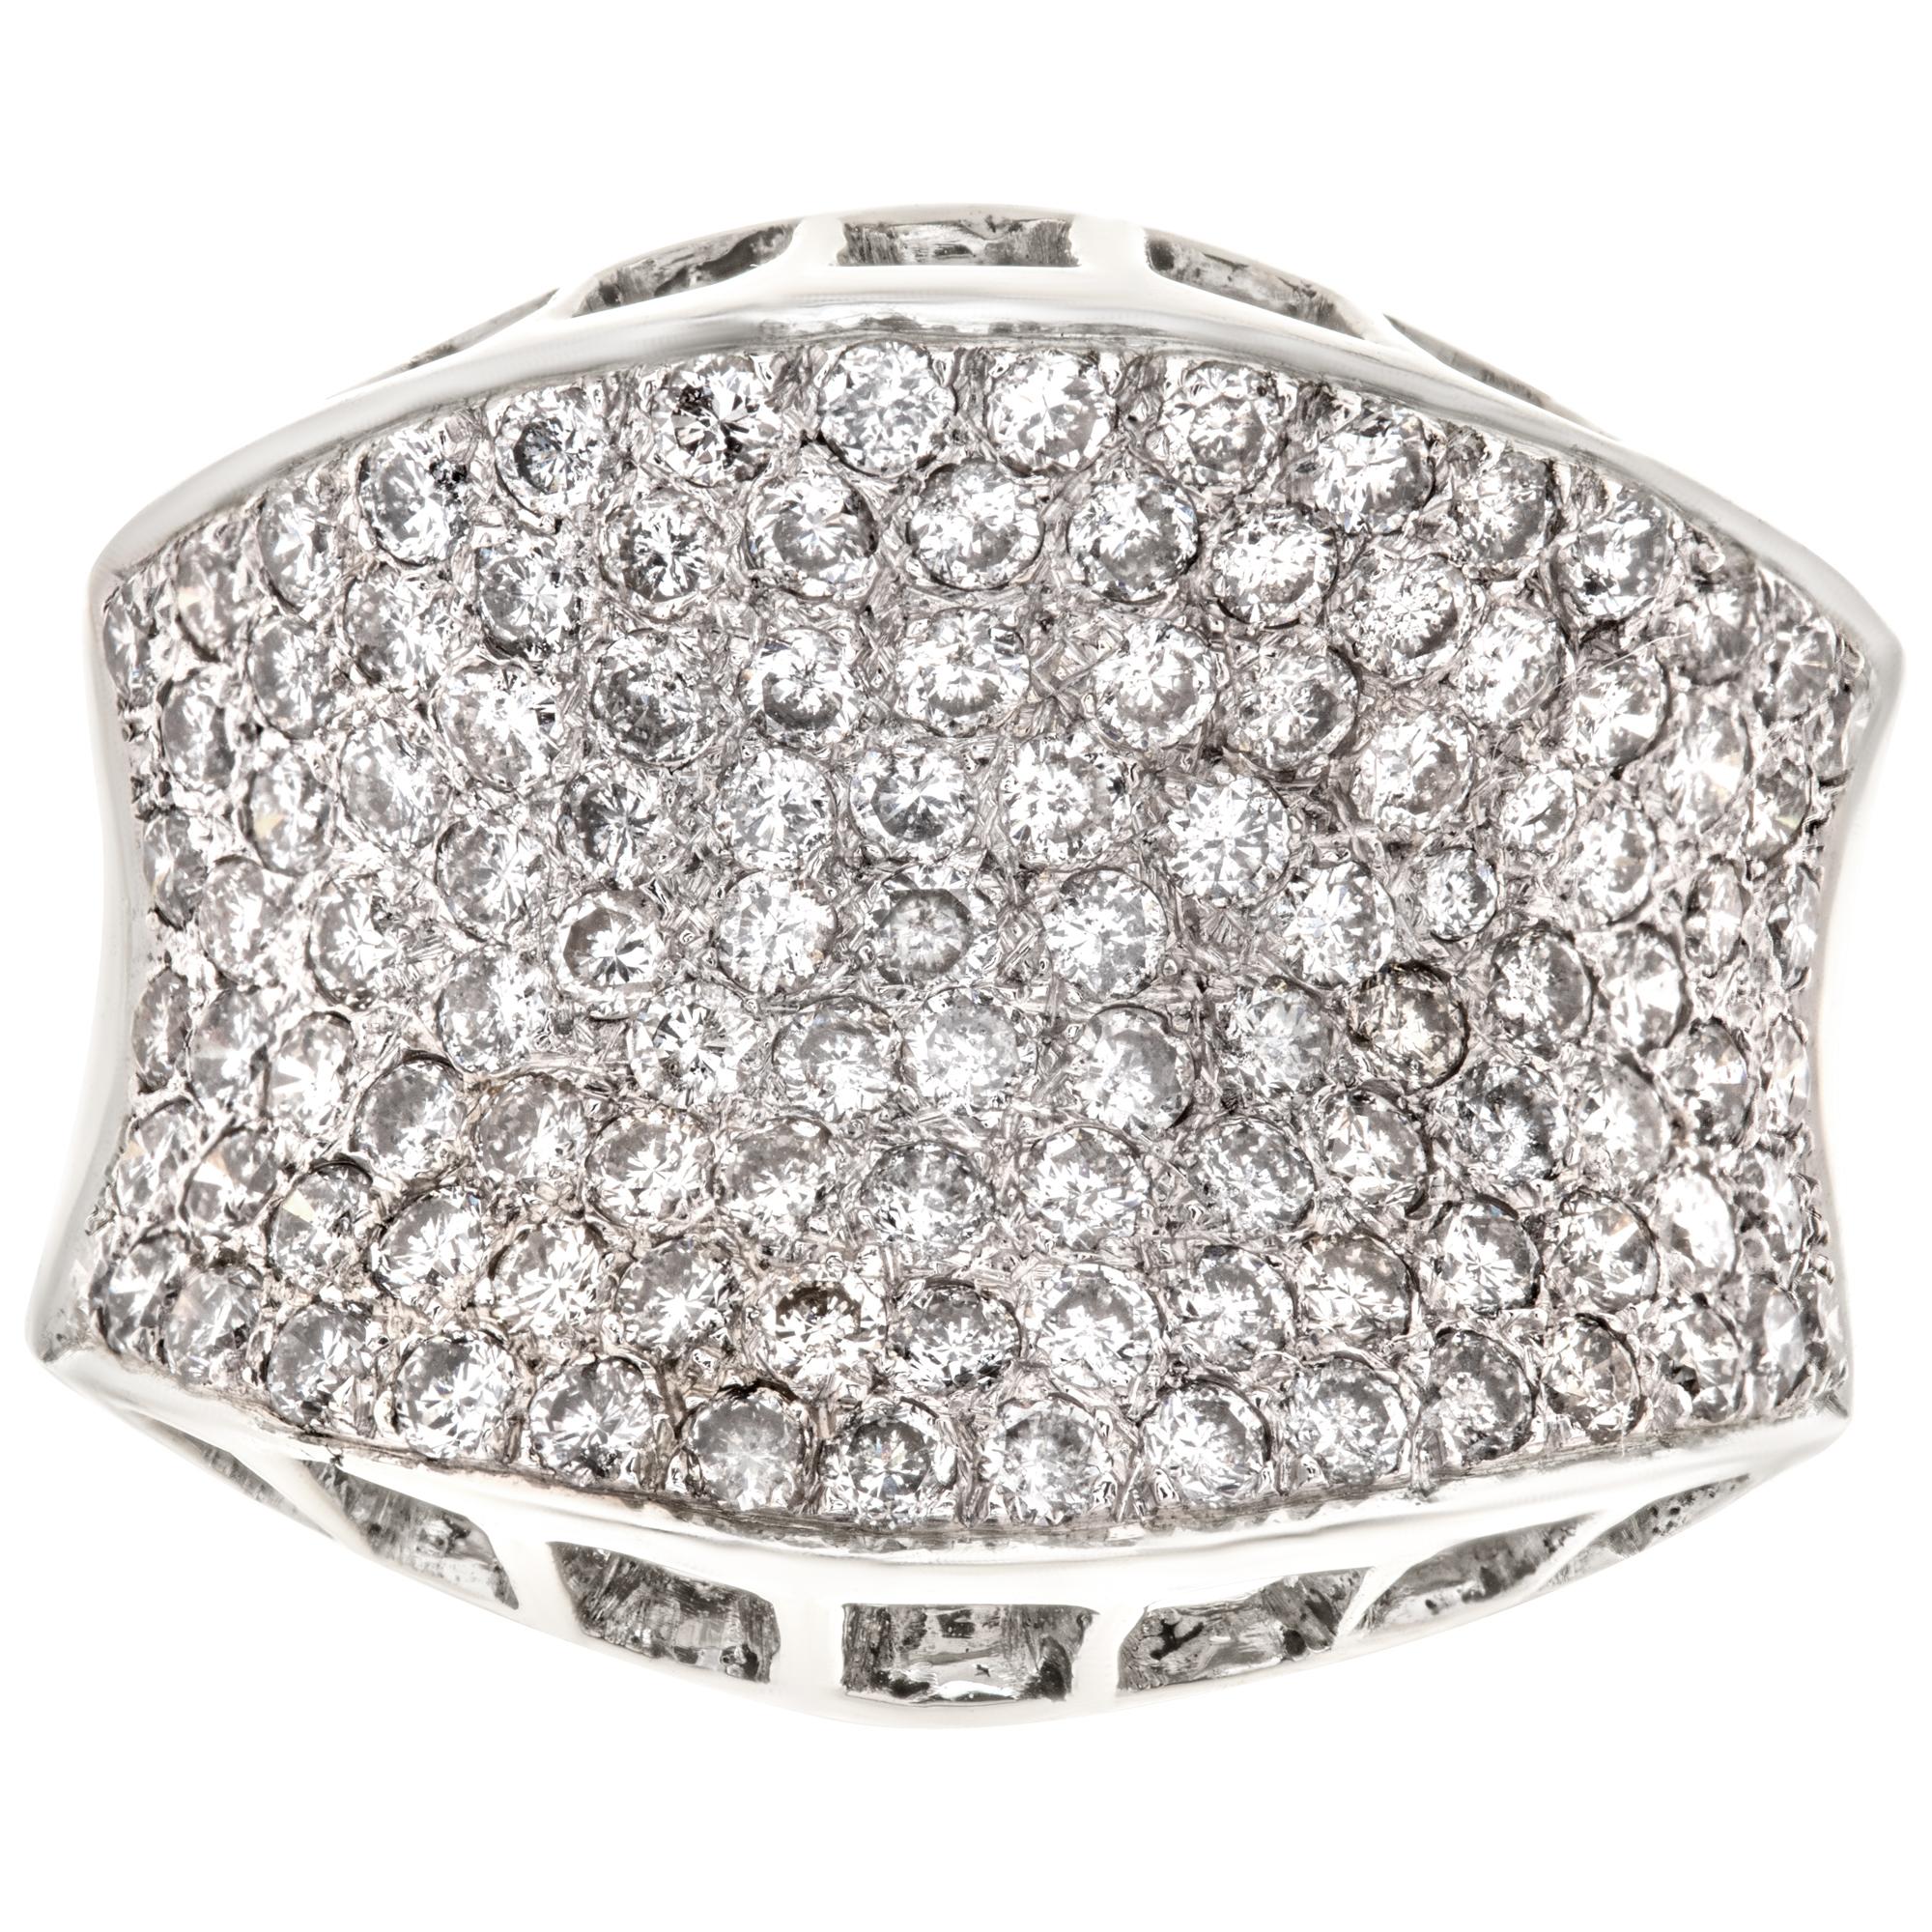 Exquisite pave diamond ring with approx. 1.25 carats of white briliant-cut diamonds set in 18k white gold. Size 6.This Diamond ring is currently size 6 and some items can be sized up or down, please ask! It weighs 4.7 pennyweights and is 18k.